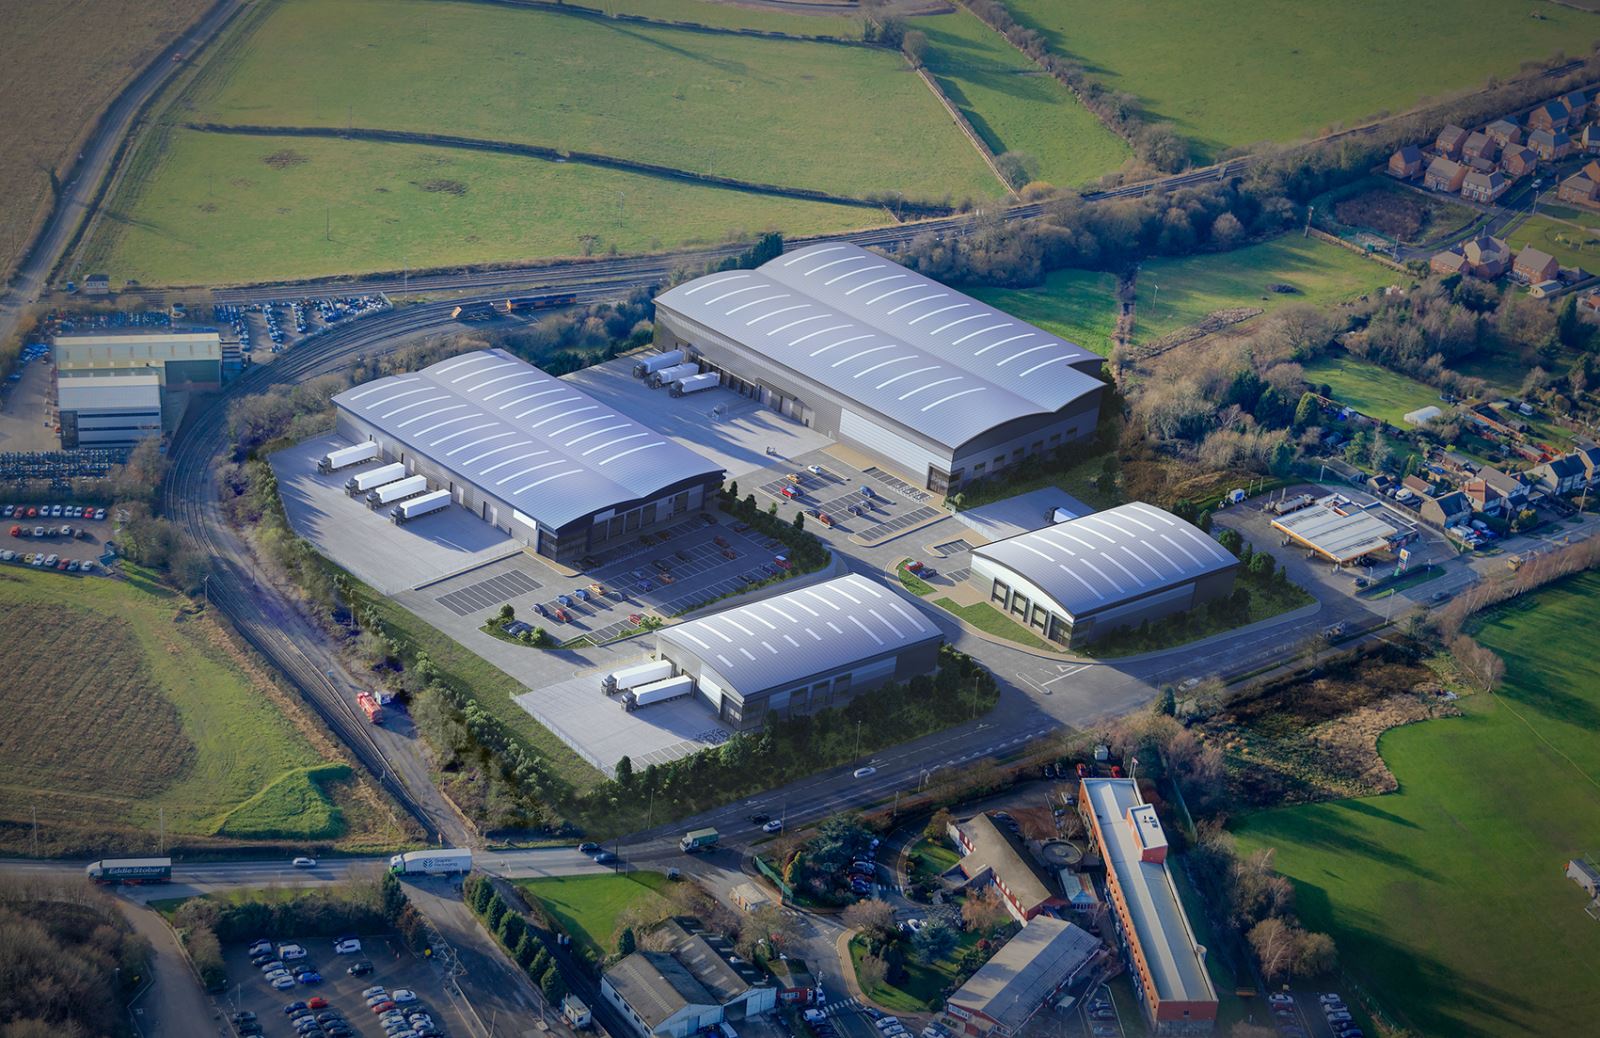 Bardon in Leicestershire in Barwood Capita's Growth Fund IV, an 11.25 acre site which is being speculatively developed for a 4-unit industrial scheme totalling 200,500 sq ft